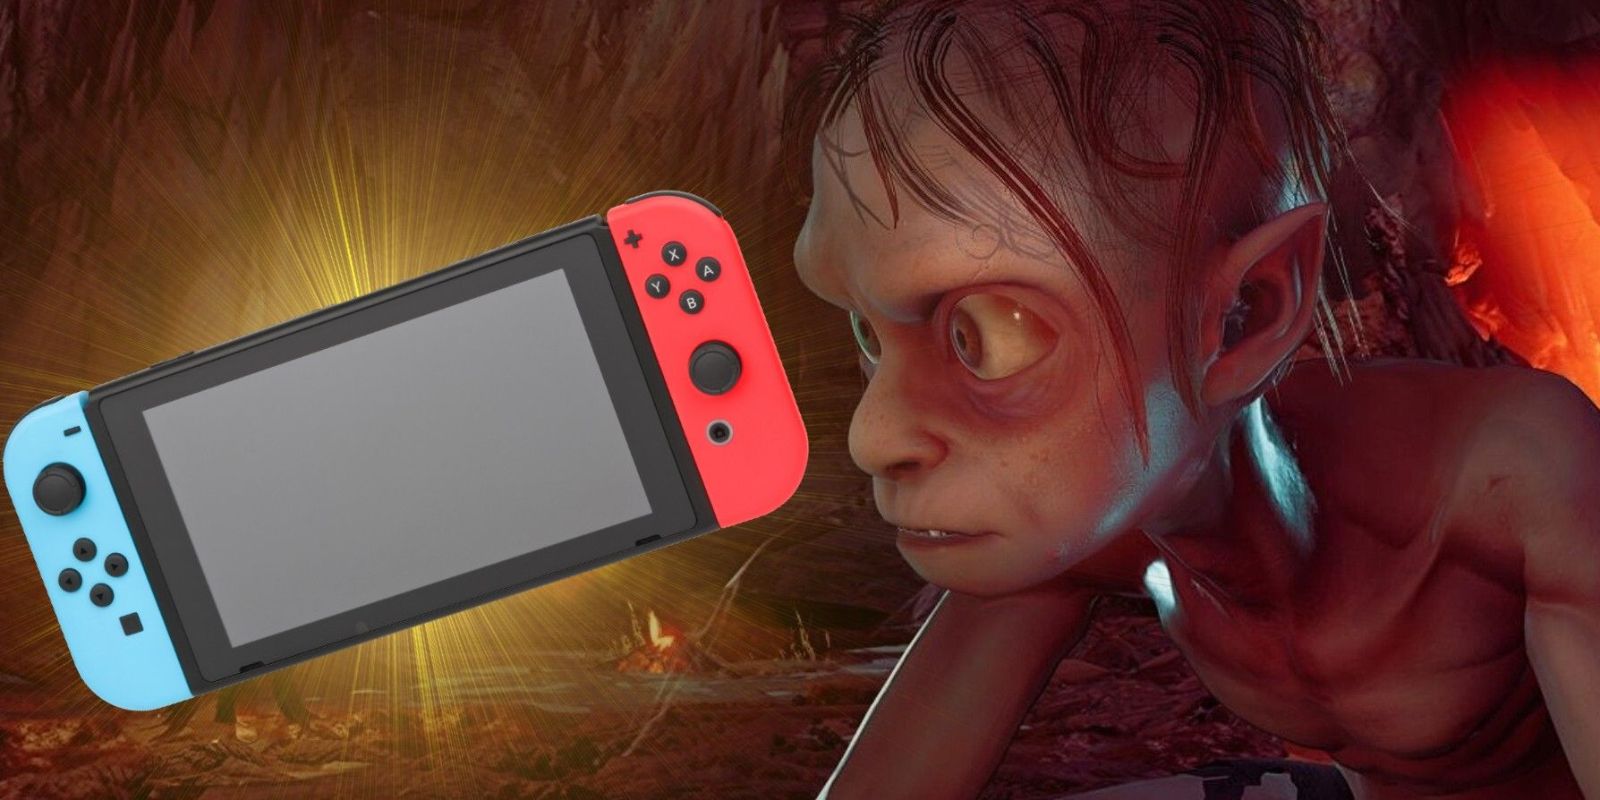 An image of Gollum looking at something off-screen in The Lord of the Rings: Gollum. Superimposed in his line of sight, on the left, is an image of a Nintendo Switch, with a yellow backlight highlighting it.